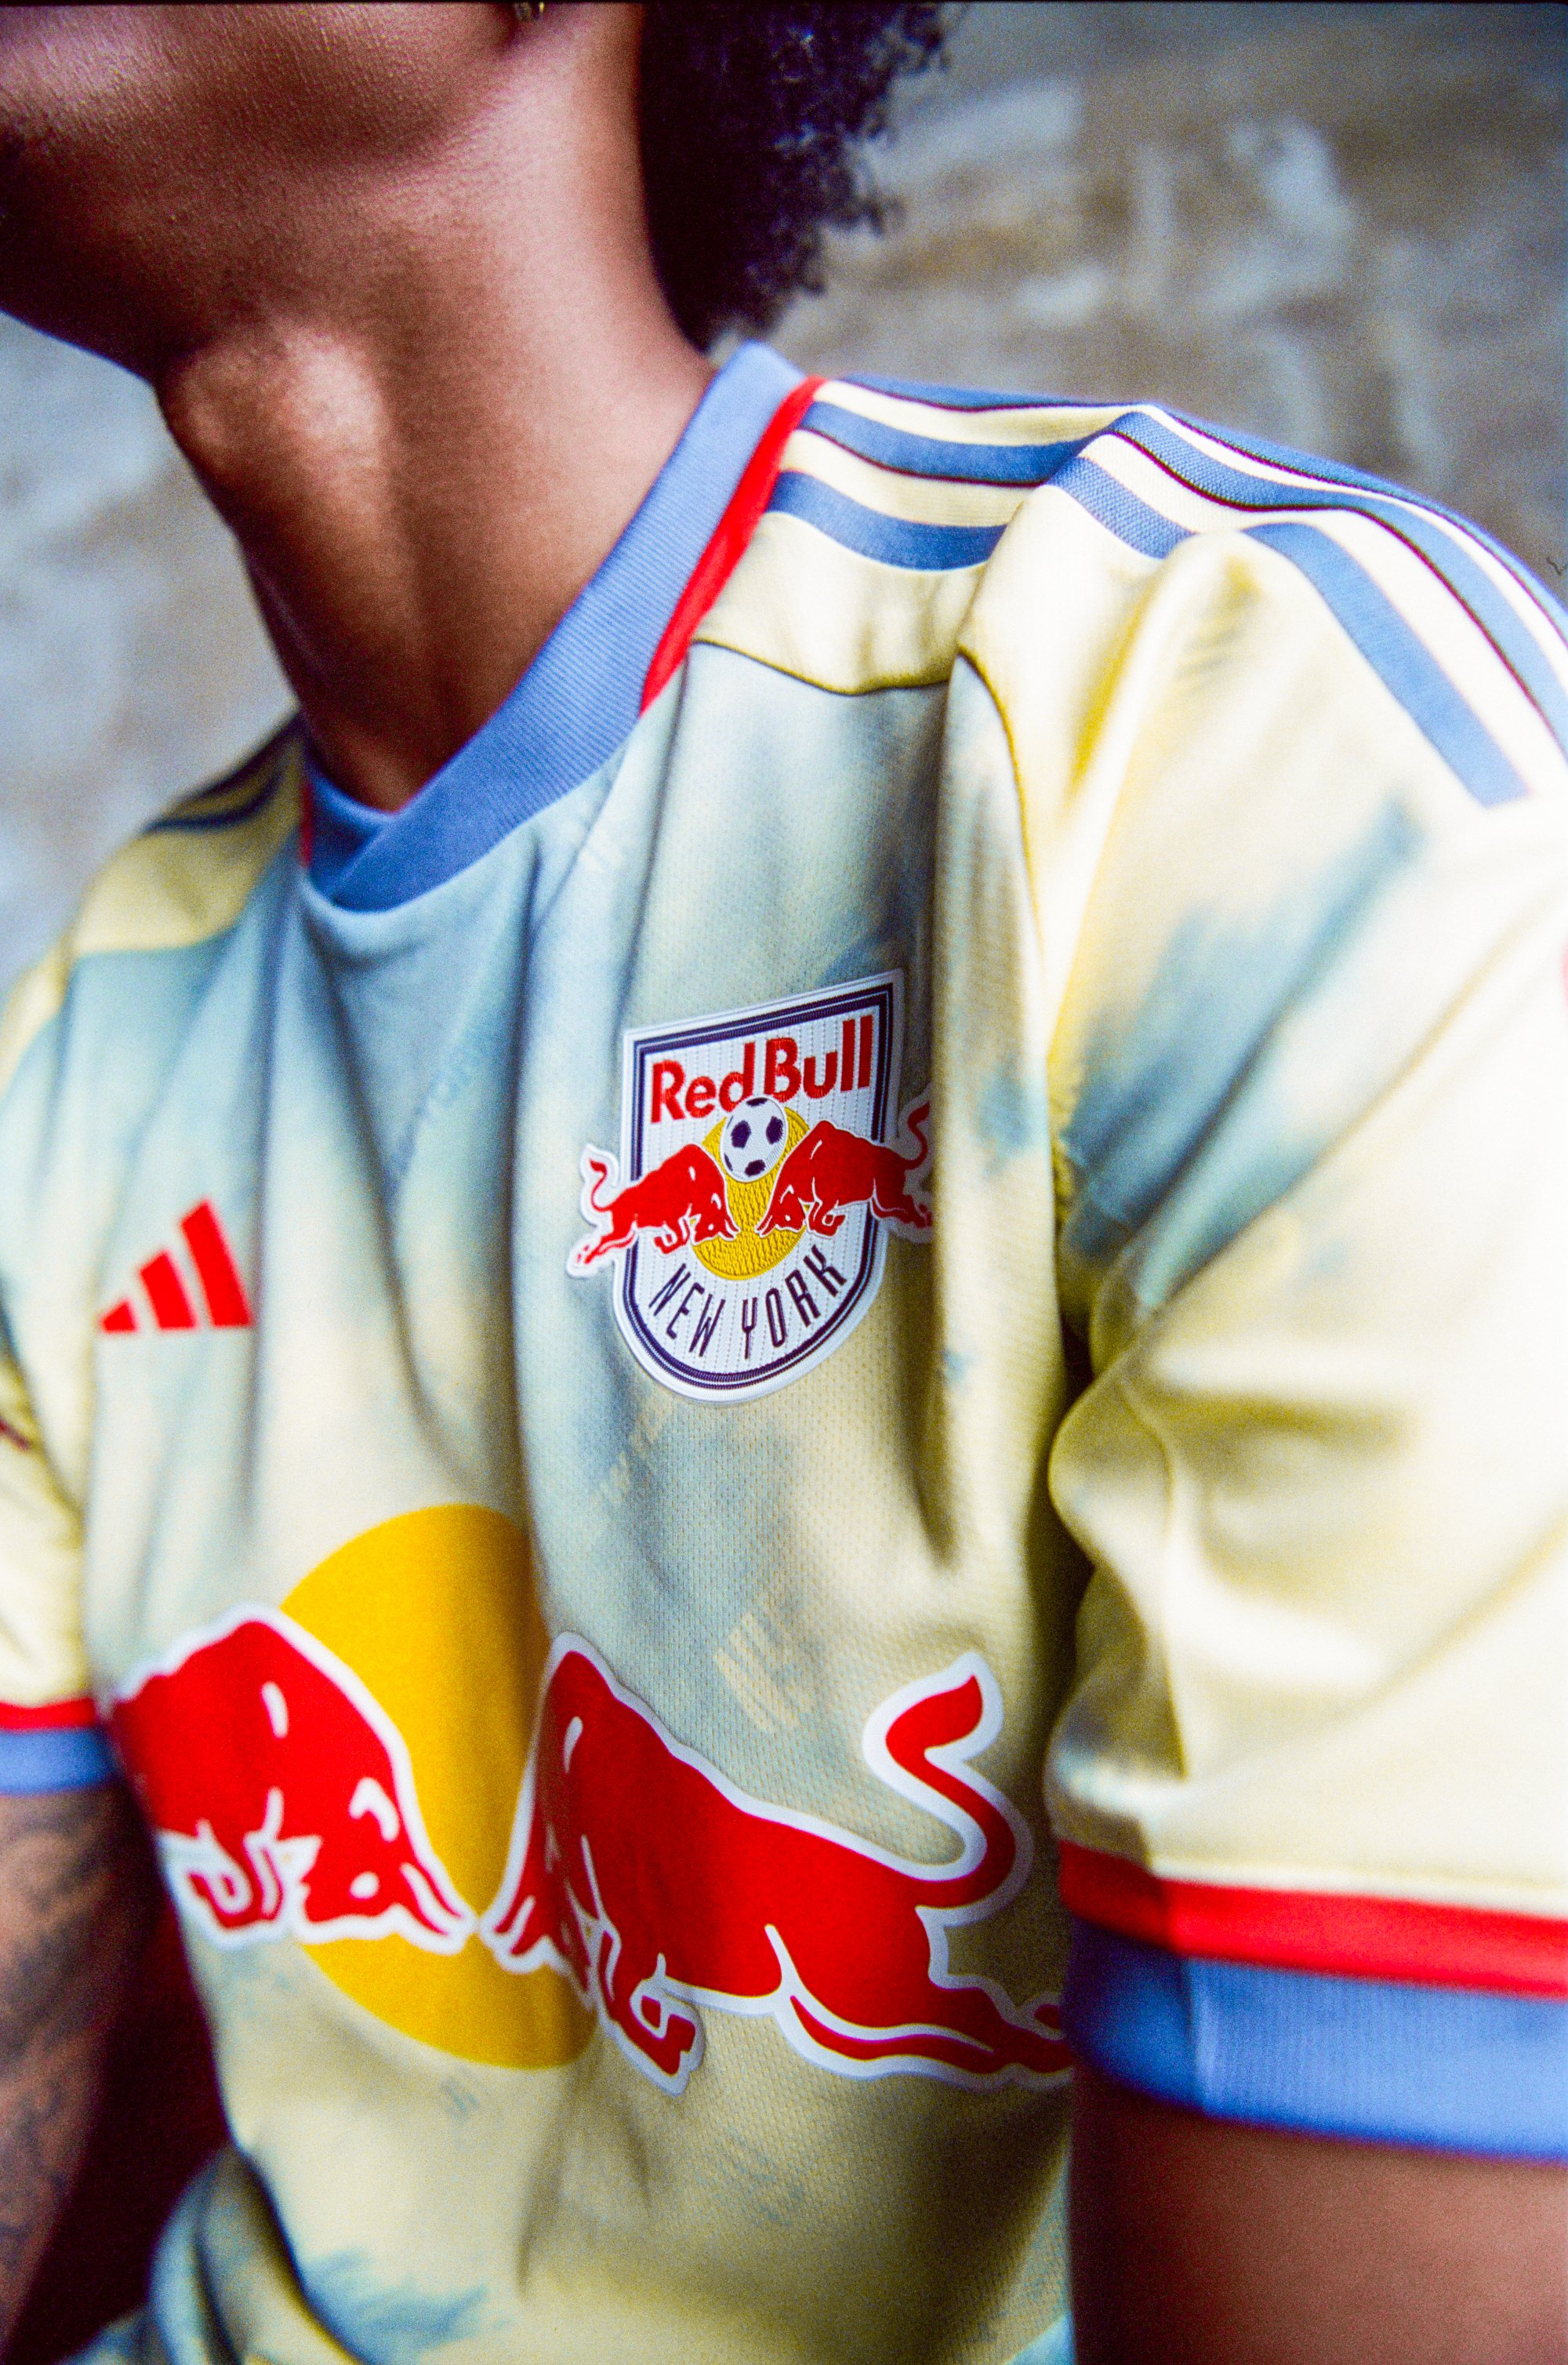 ON THE SLEEVE: OANDA becomes Red Bulls jersey sponsor - Front Row